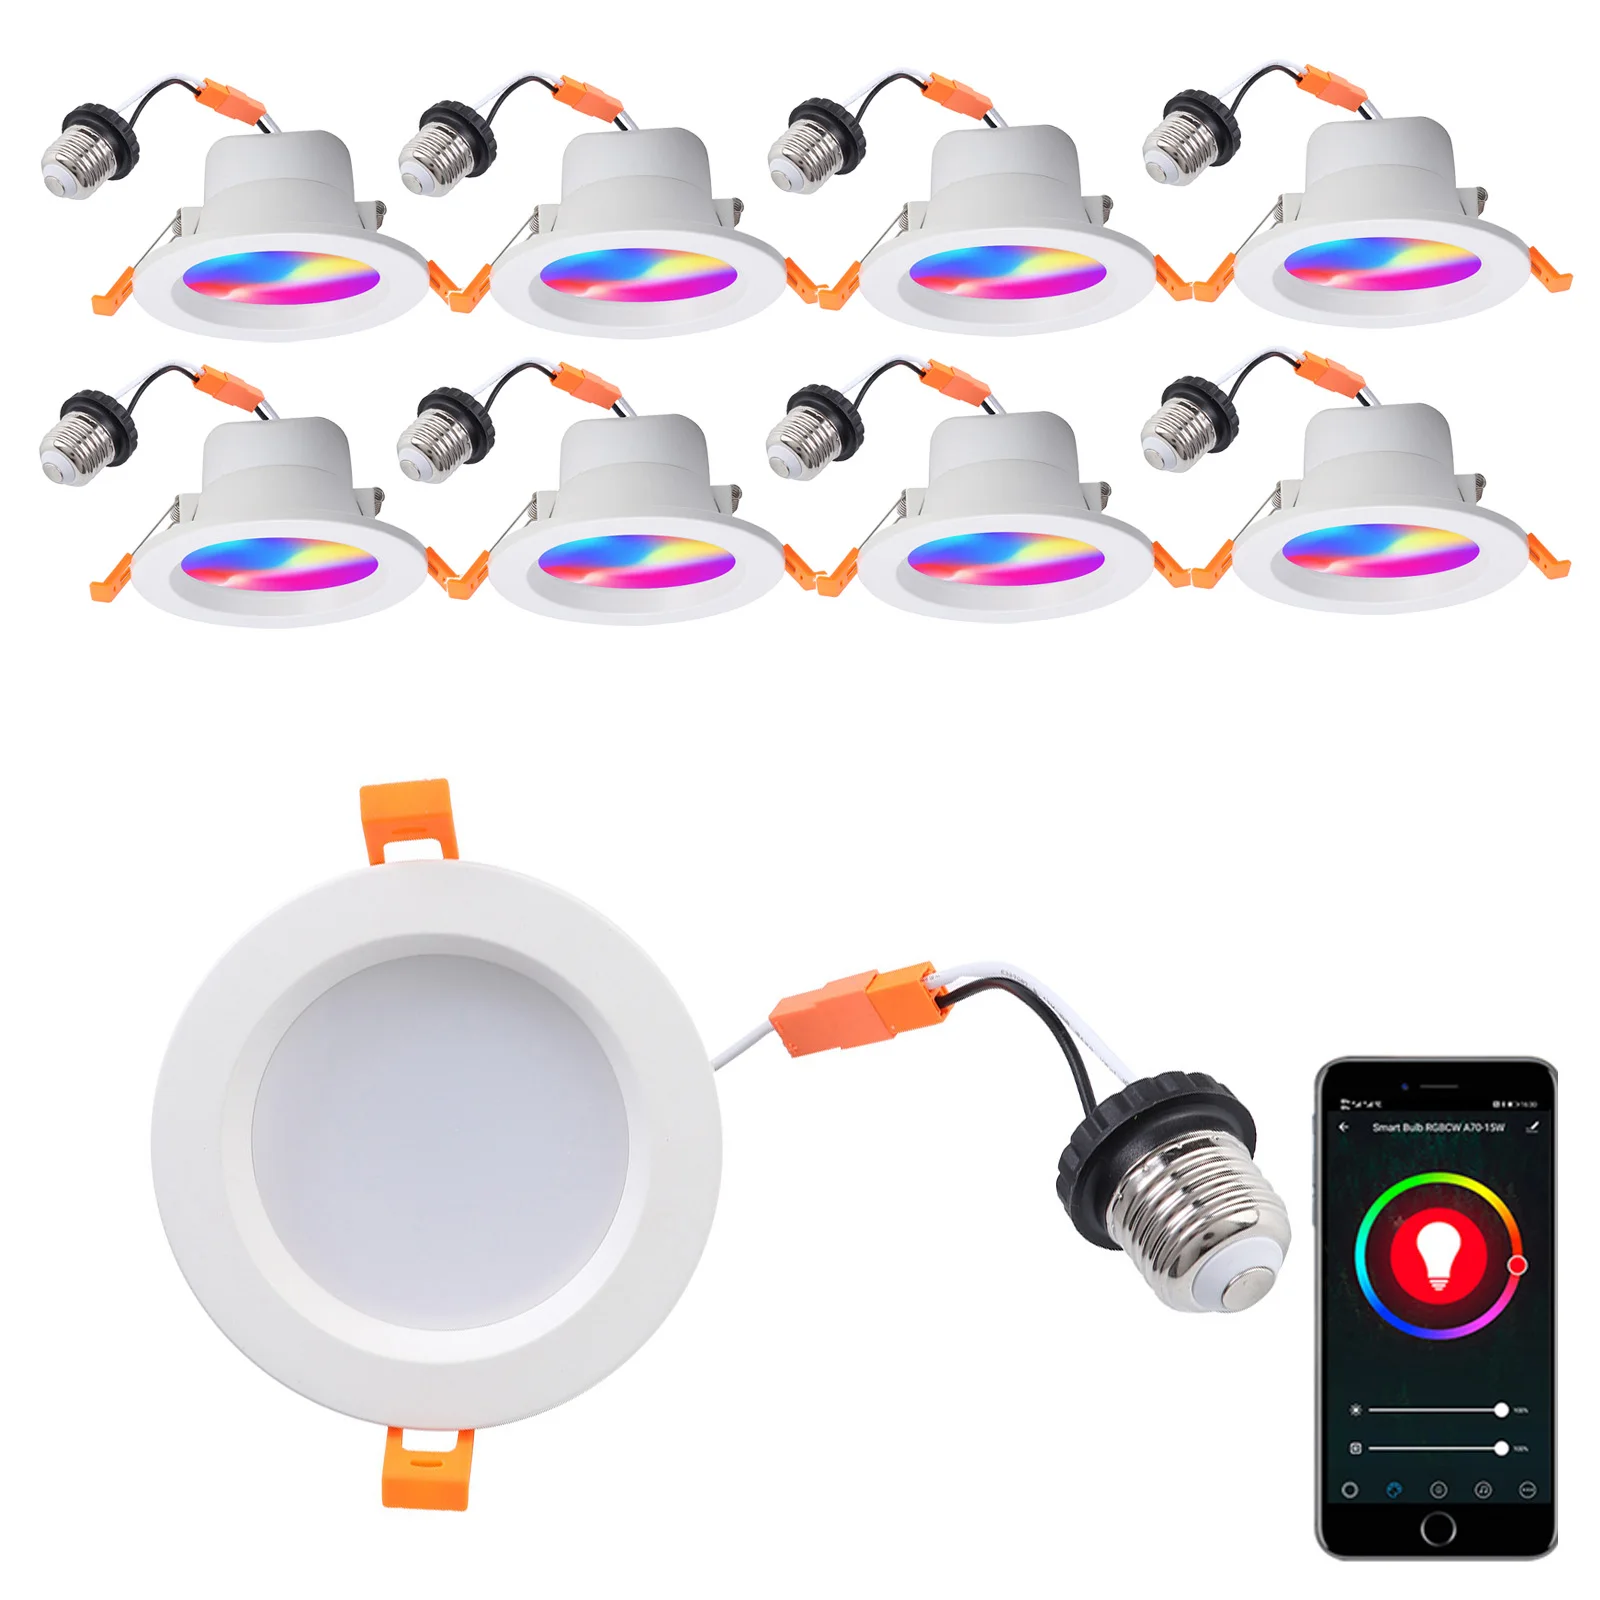 

LED Downlight Spot LED Recessed Smart Dimmable 10W Round Light AC85-265V RGB Color Changing Work With Alexa/Google Home